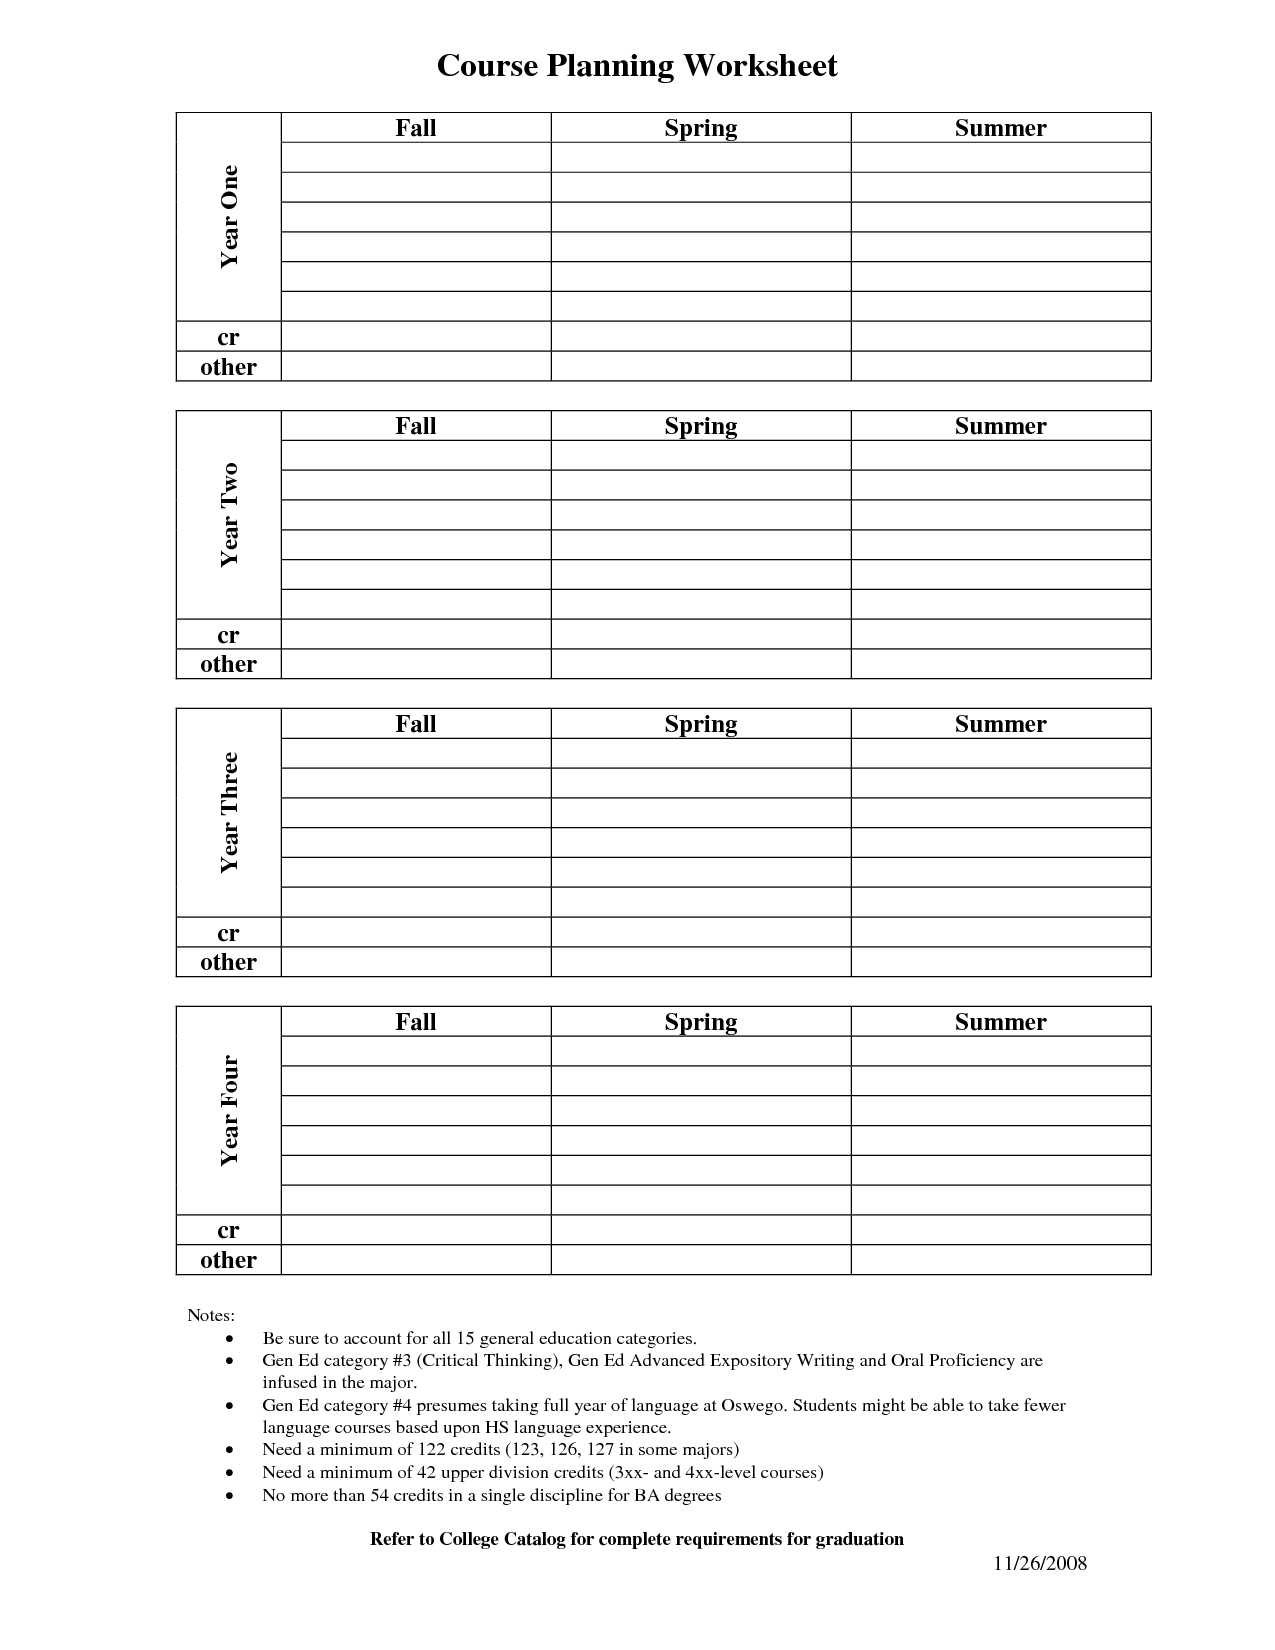 11 Best Images of FourYear Course Planning Worksheet High School